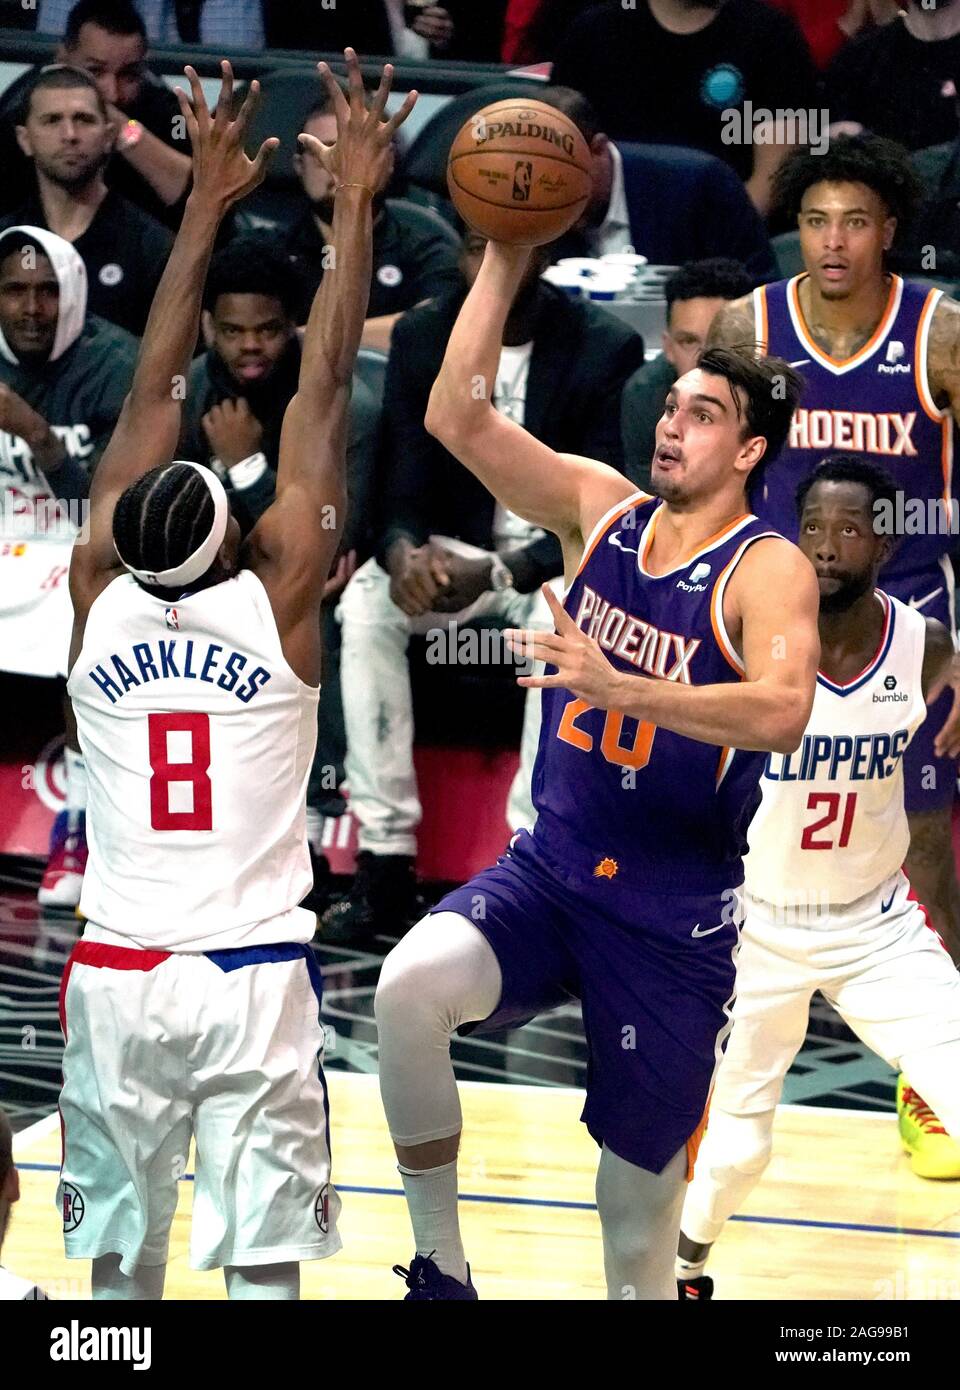 Phoenix Suns Dario Šari? shoots over Los Angeles Clippers Maurice Harkless in first quarter action at Staples Center in Los Angeles Tuesday, December 16, 2019. The Clippers defeated the Suns 120-99. Photo by Jon SooHoo/UPI Stock Photo